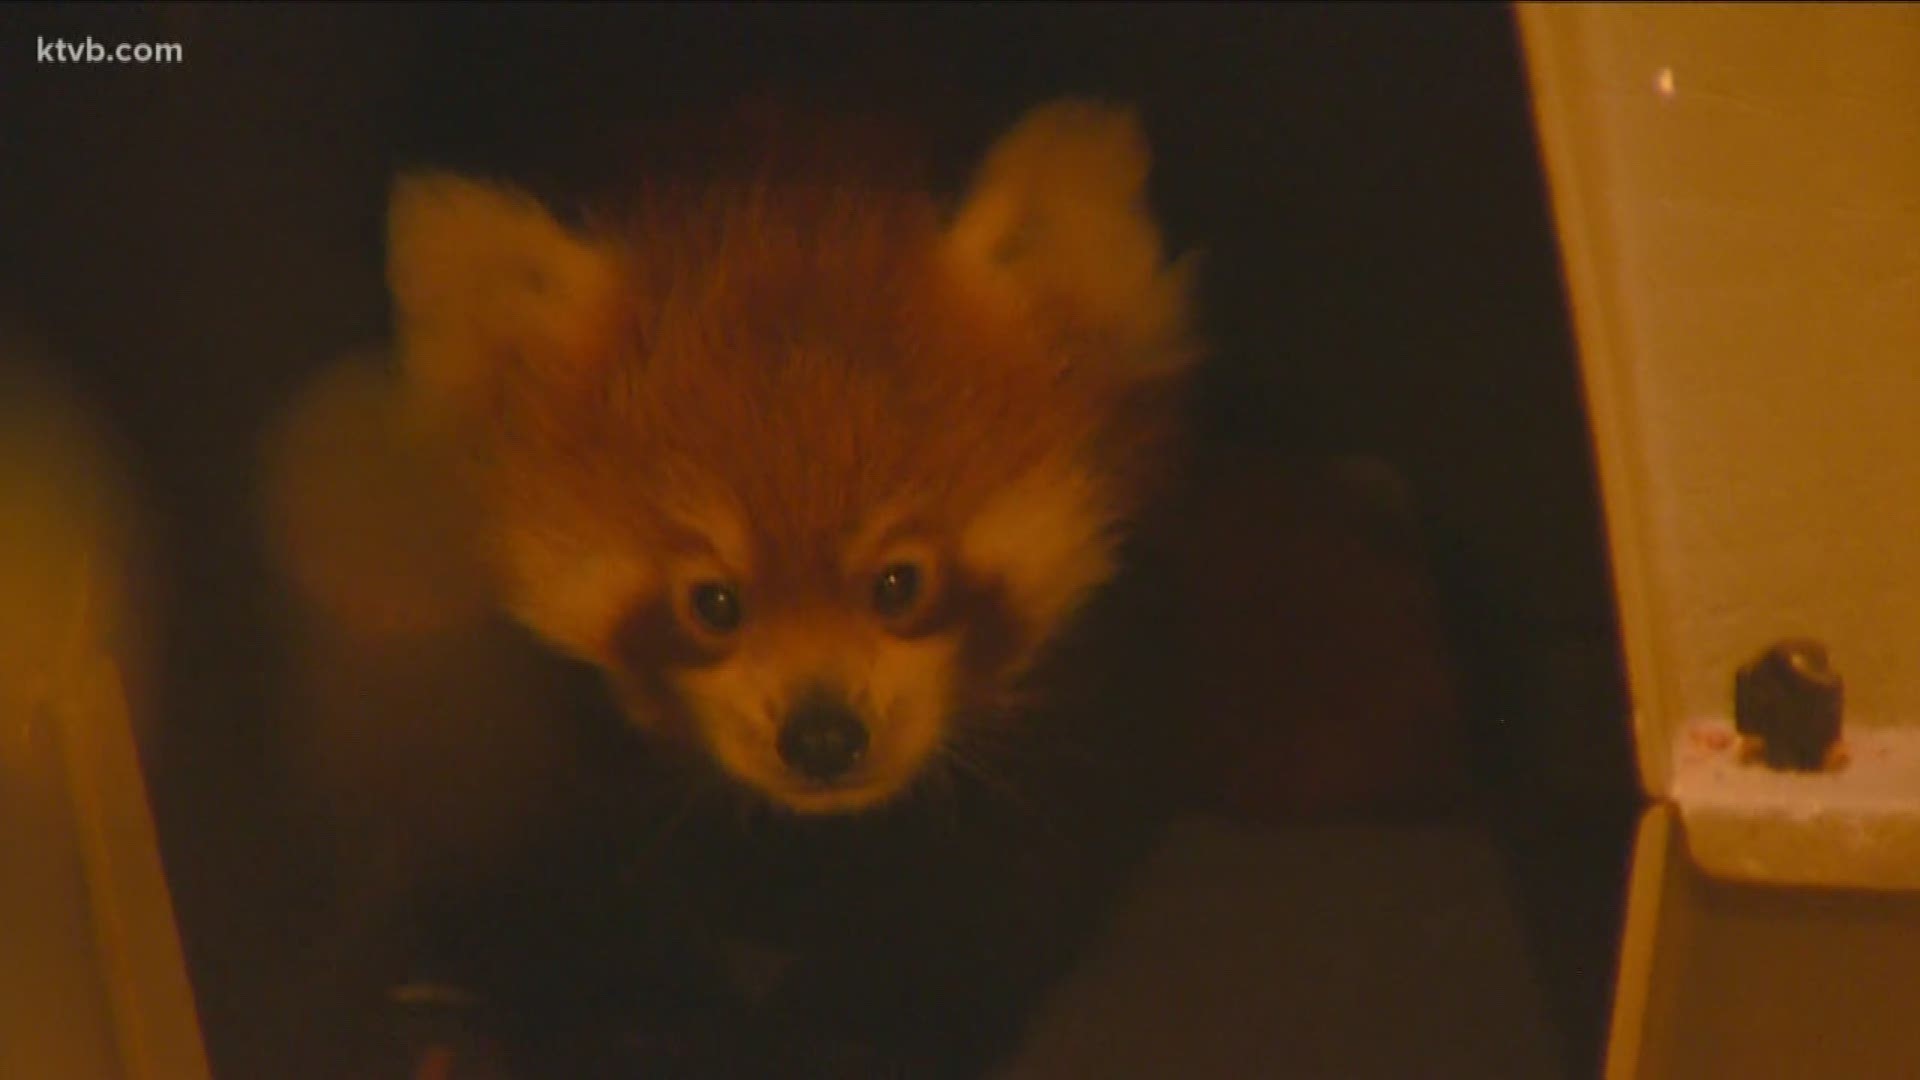 KTVB's Joe Parris gets an exclusive look at the zoo's newest addition - Spring, the baby red panda.